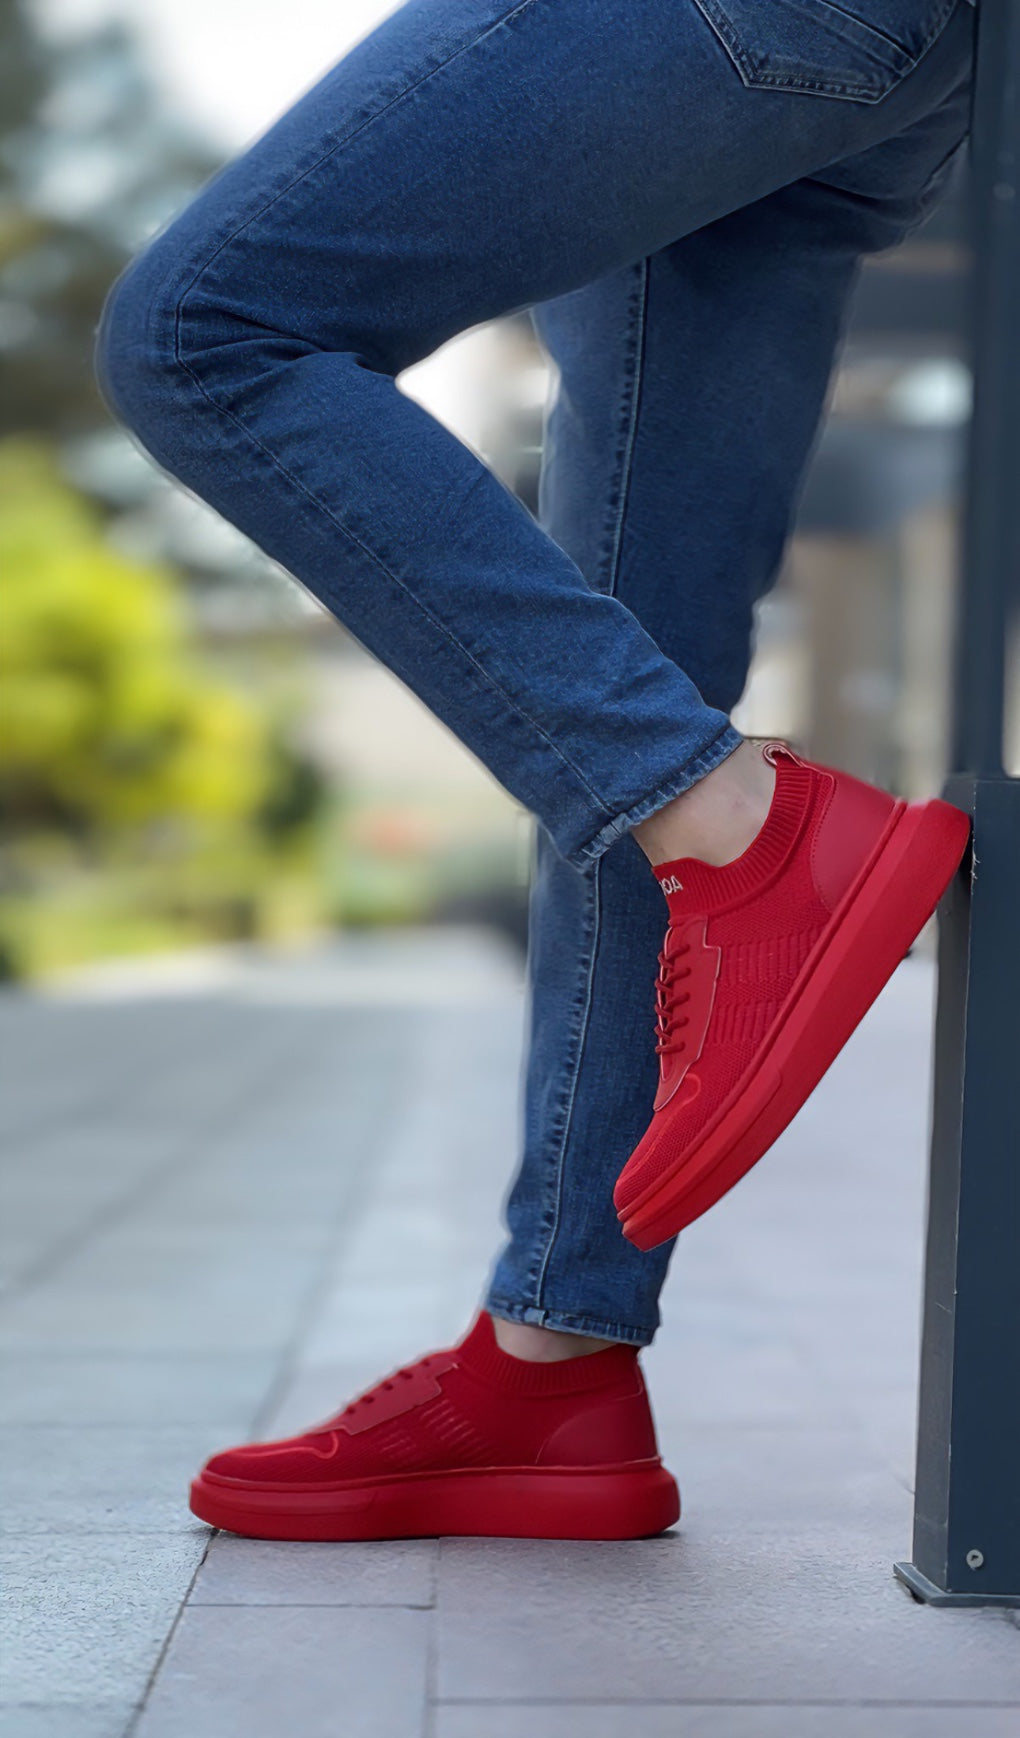 BA0812 Special Knitted Knitwear Style Red Color Sports Shoes - STREETMODE™